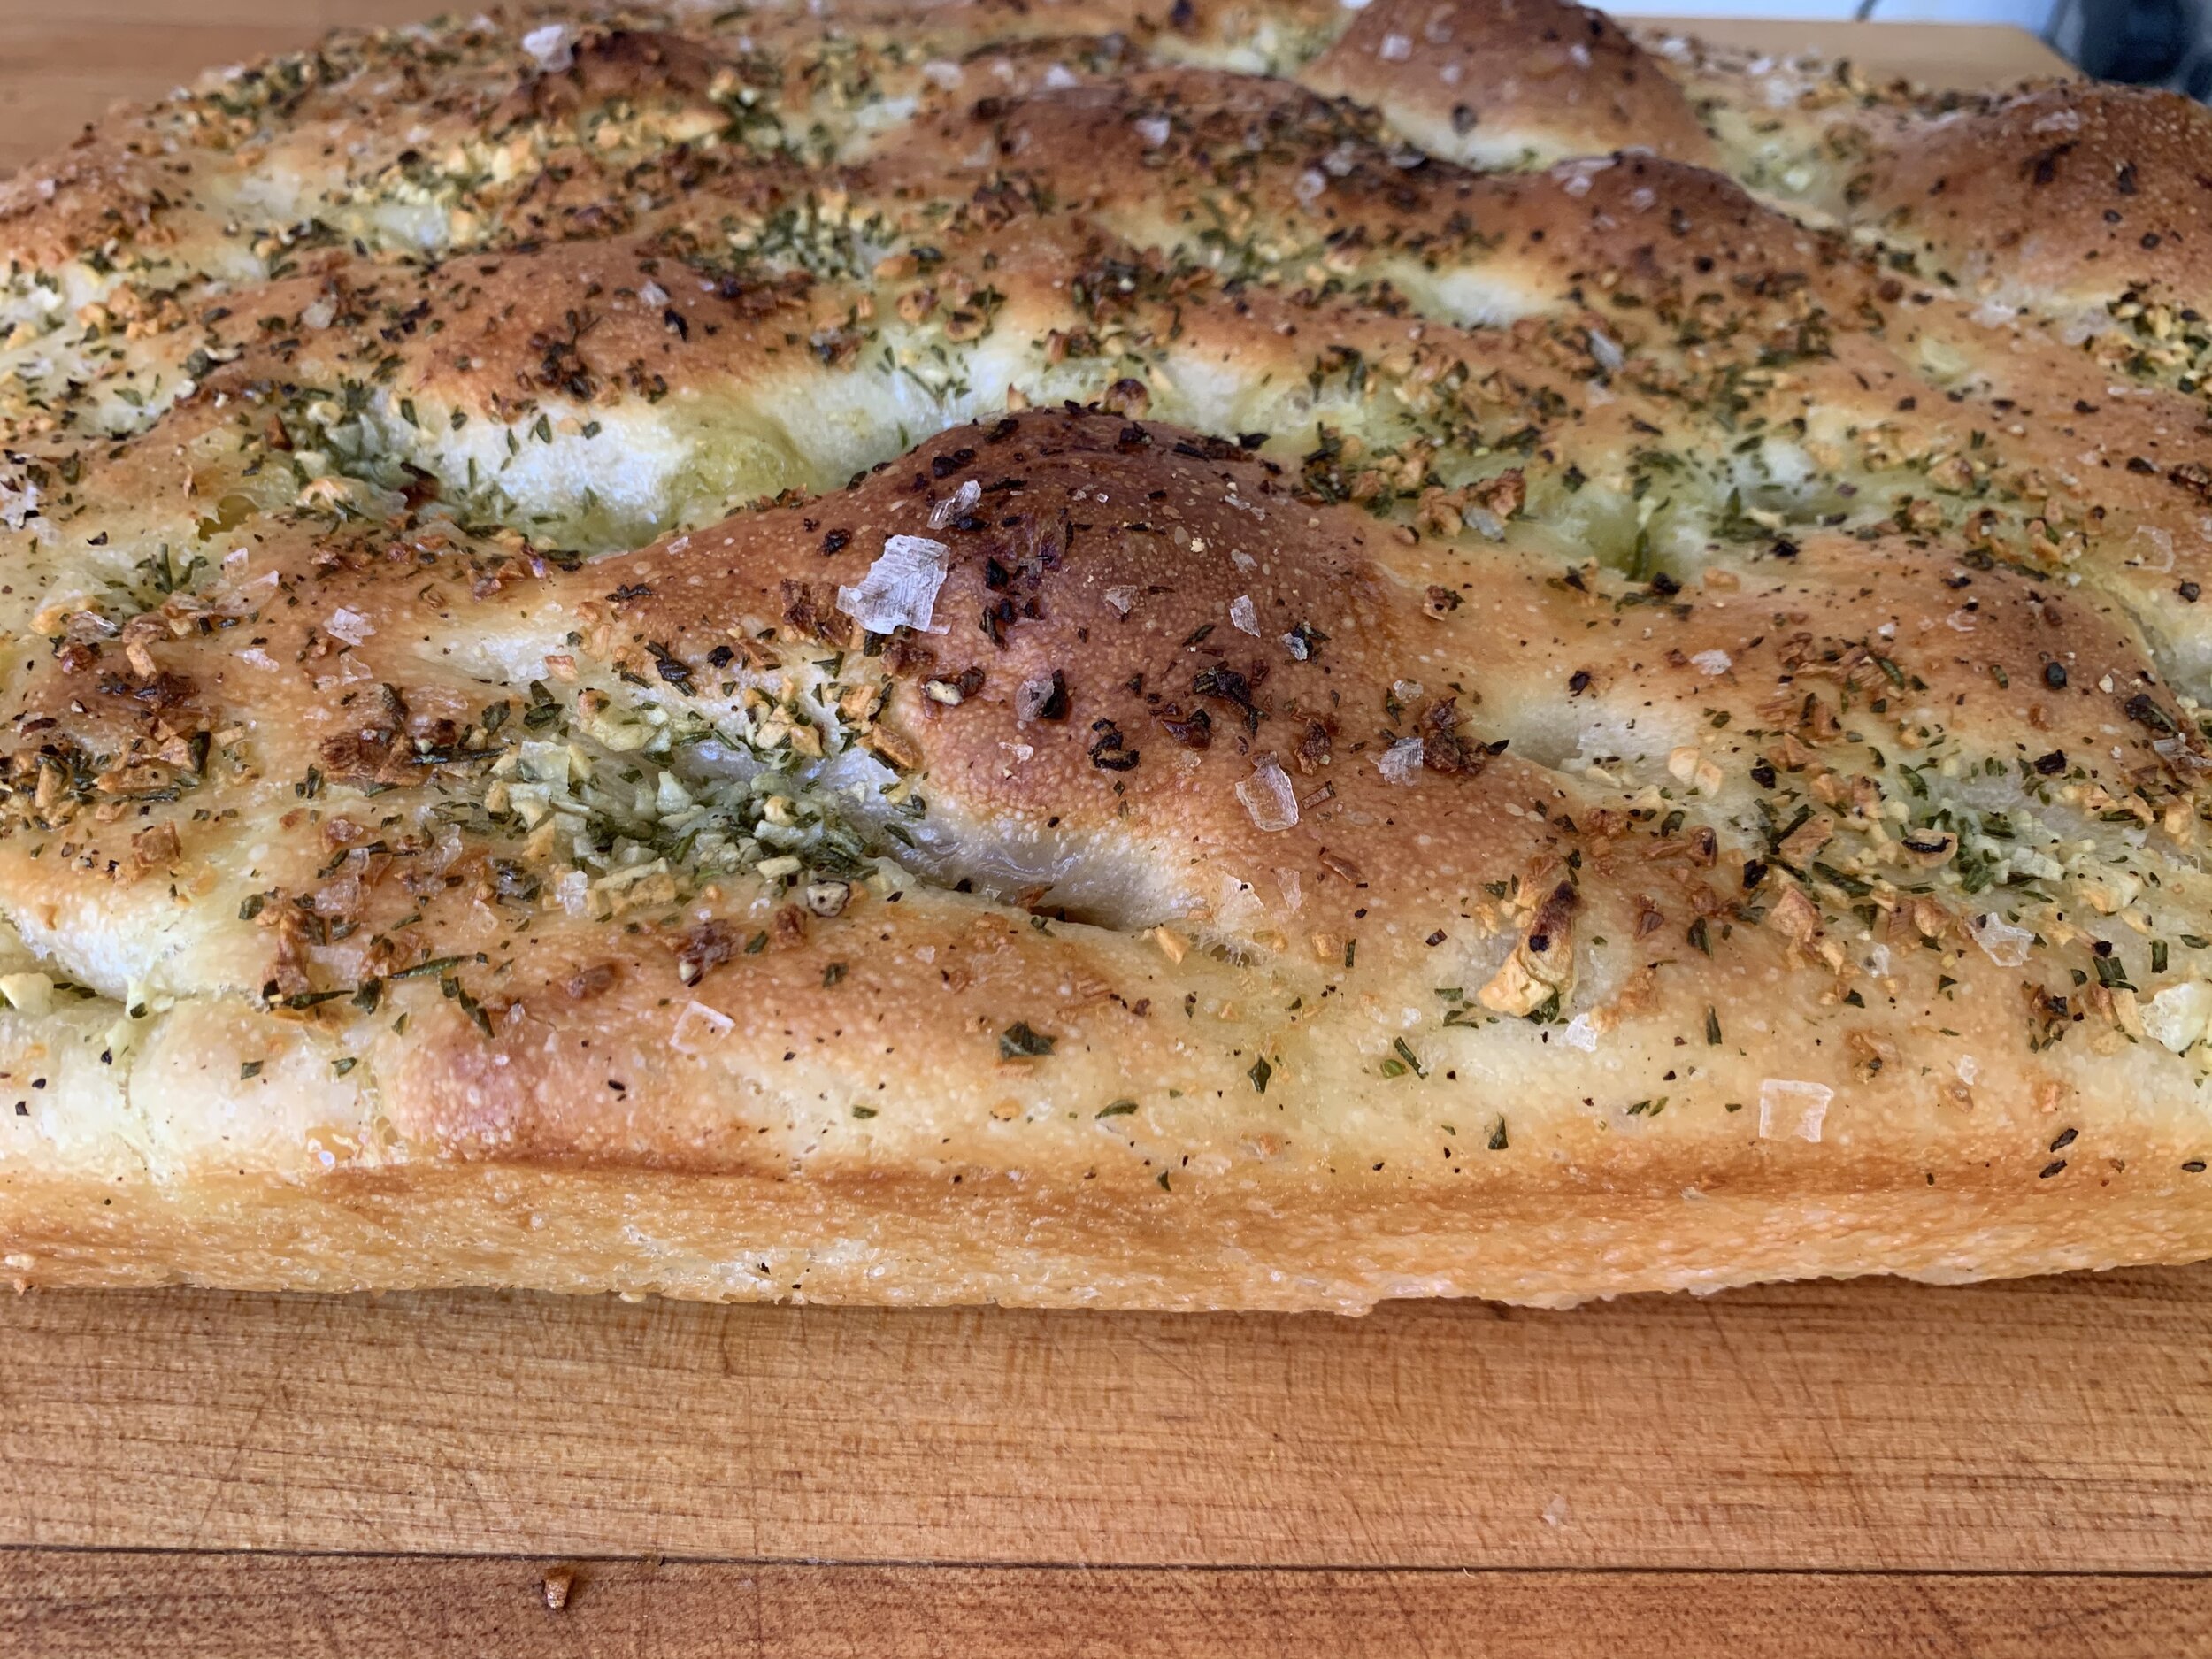 Focaccia fresh from the oven